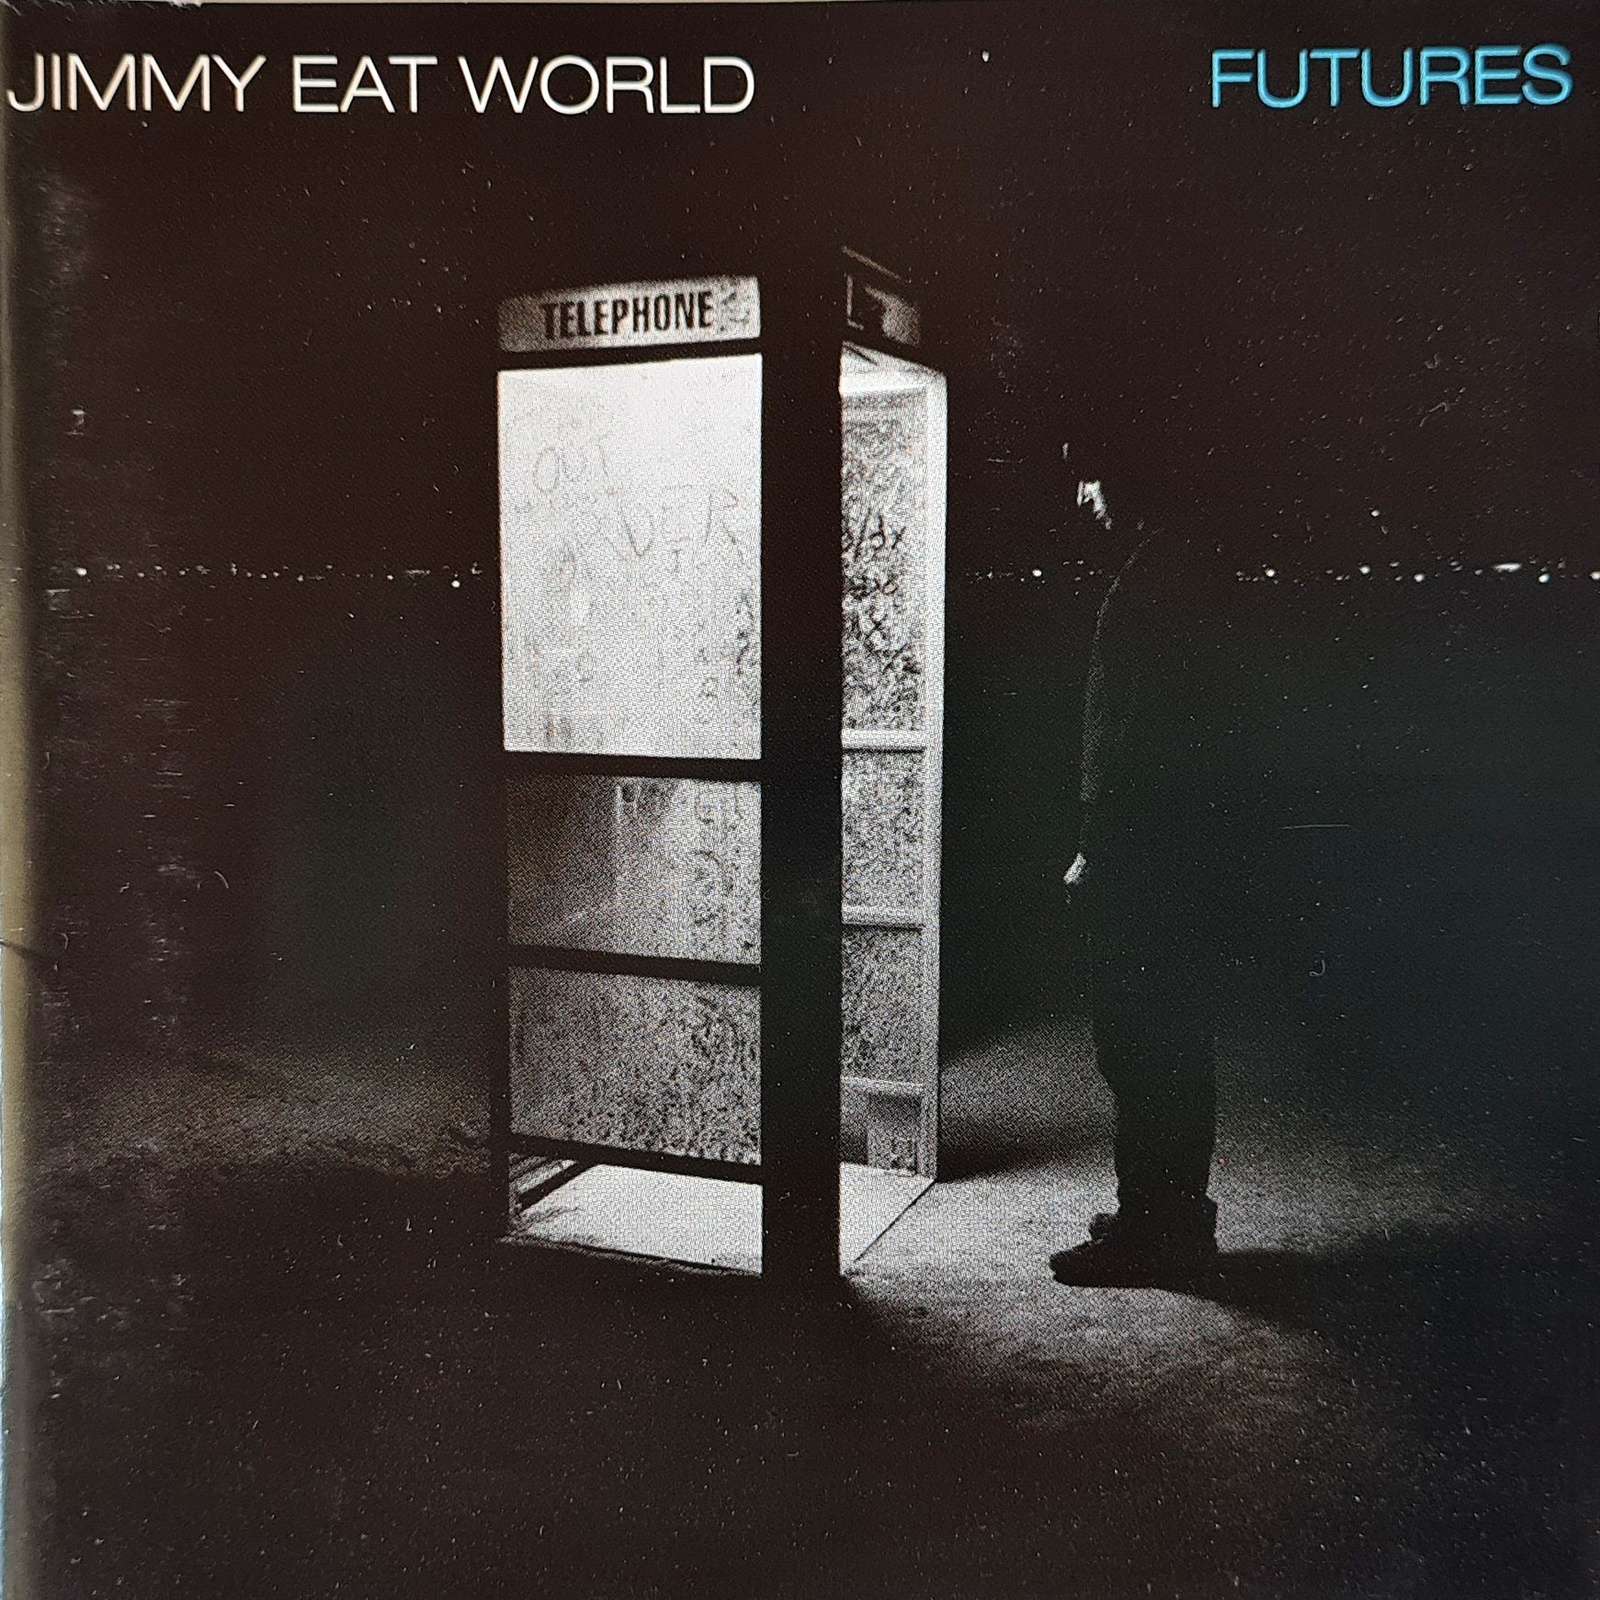 Jimmy Eat World - Futures (CD)